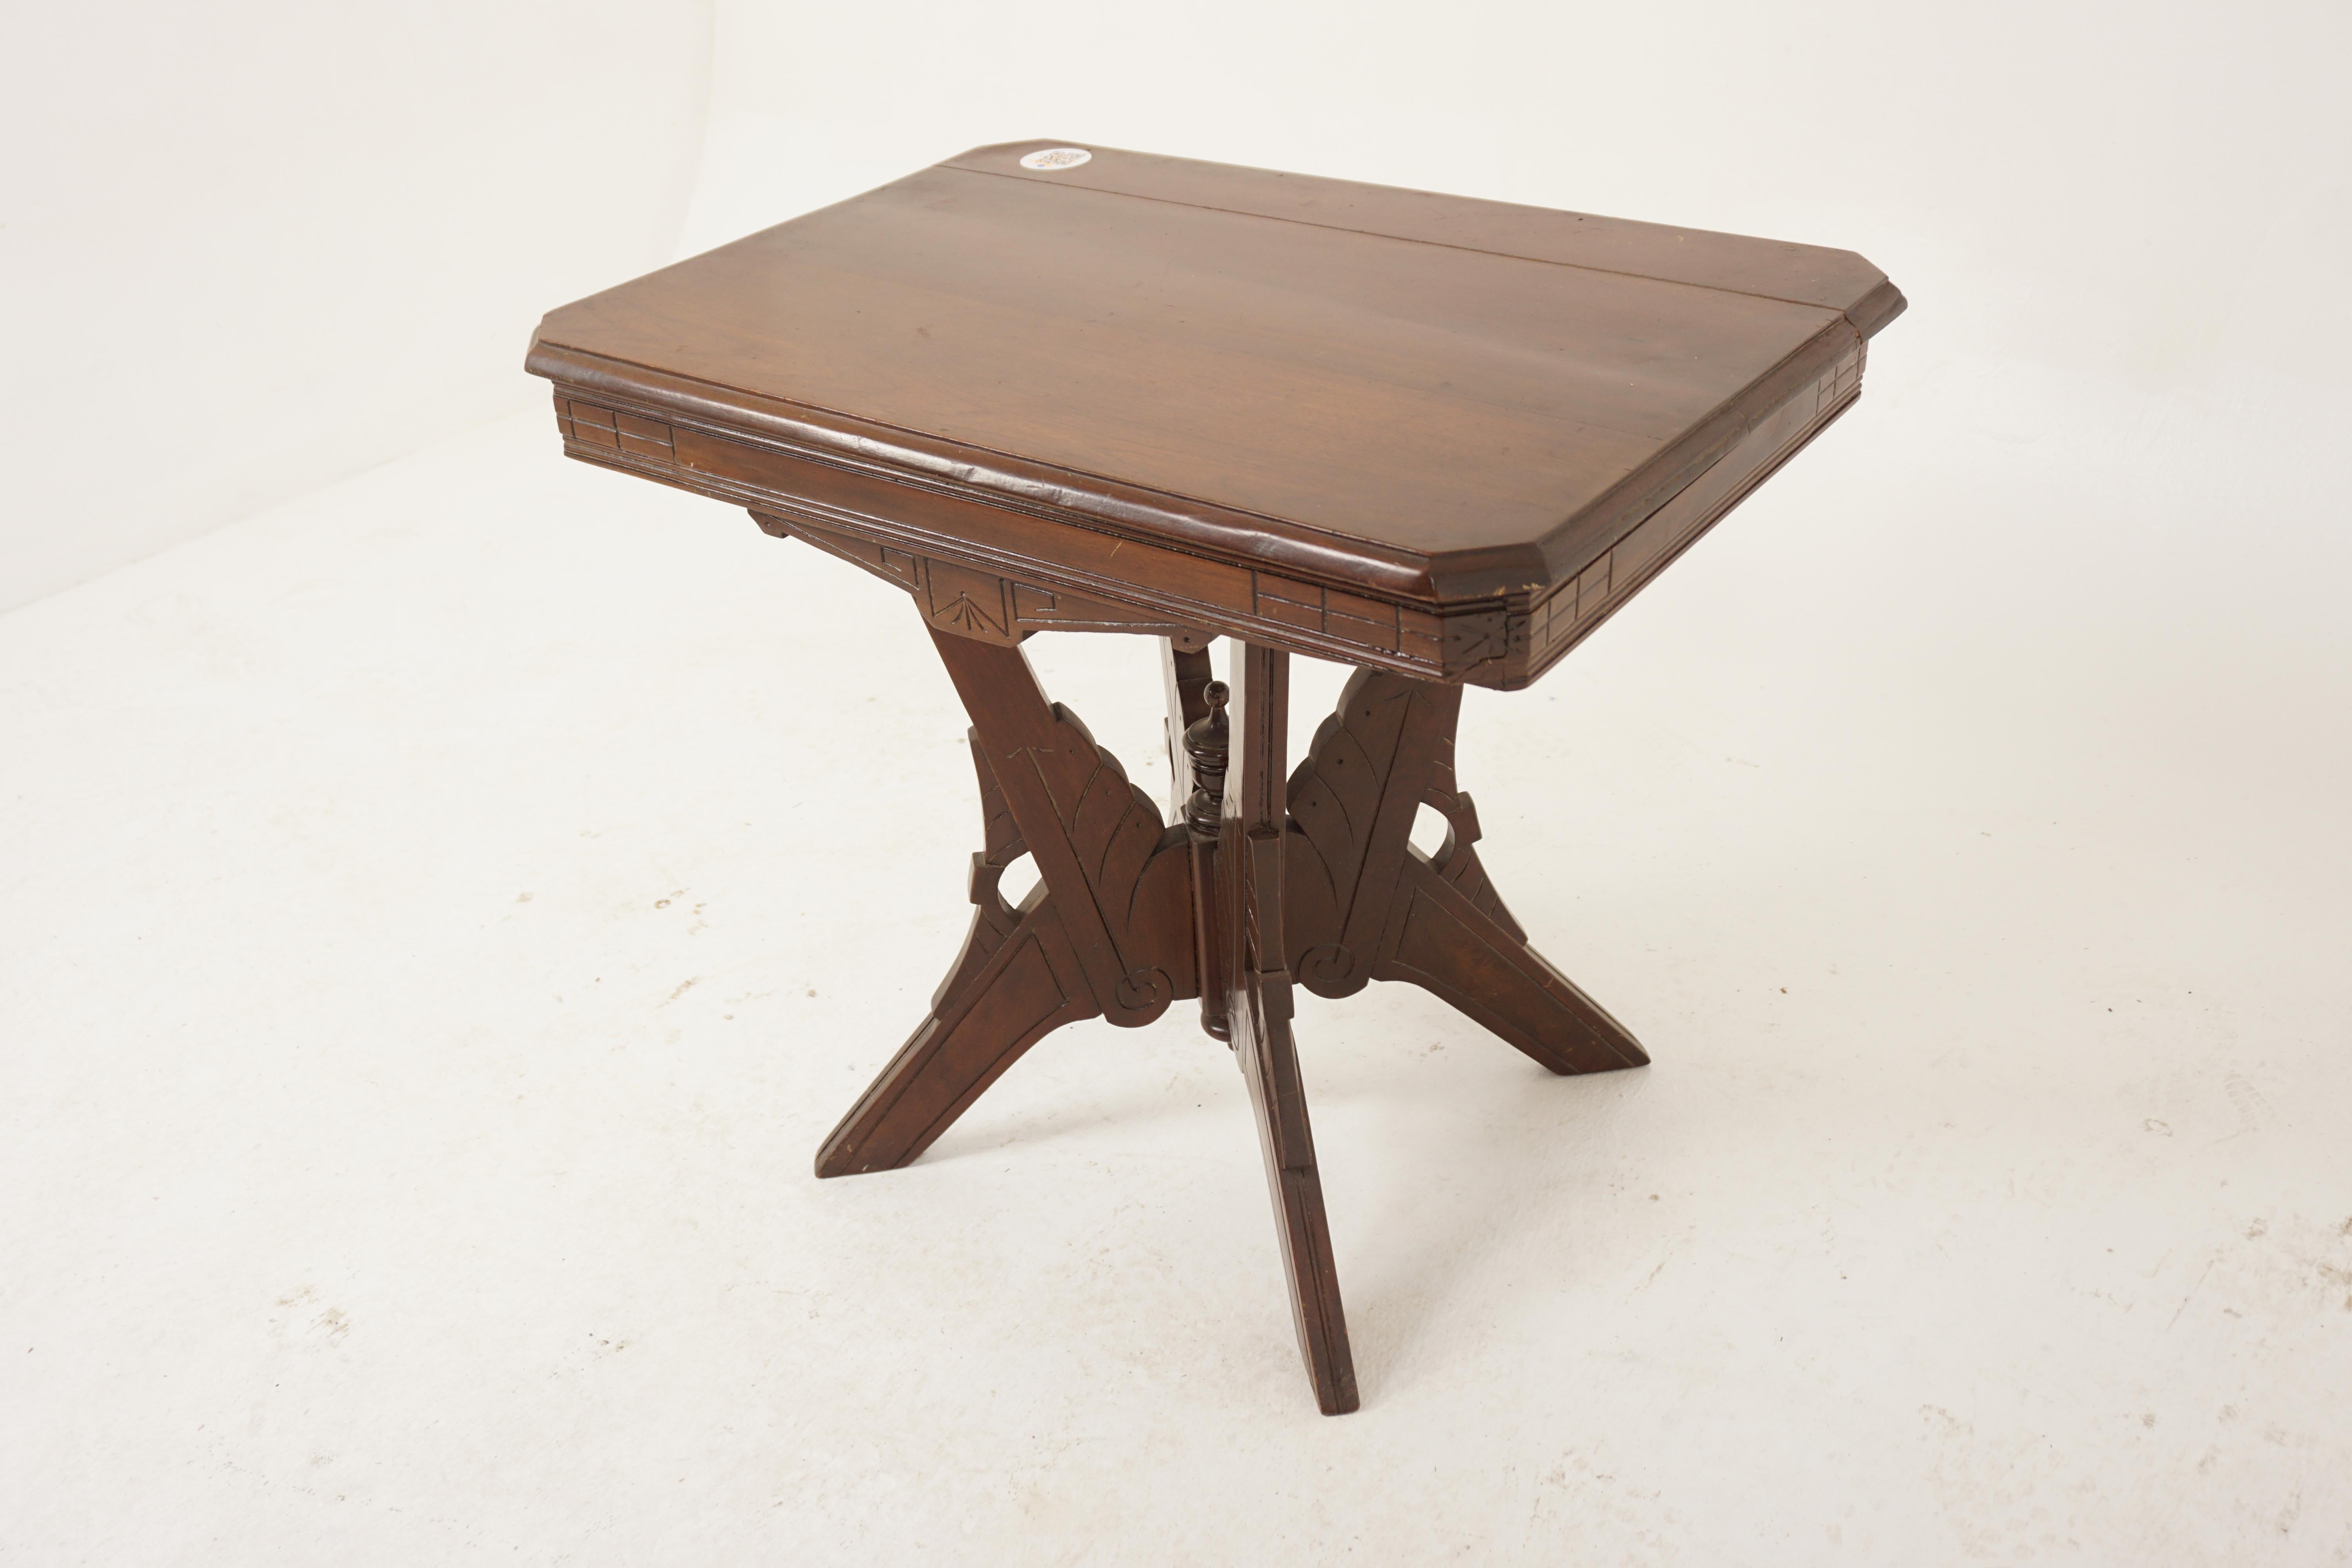 Ant. American carved walnut Eastlake parlour table, American, 1890.

American, 1890
Solid walnut
Original finish
Rectangular moulded top with beveled edge.
Standing on four carved legs with center finial.
All solid in joint.
Does have a